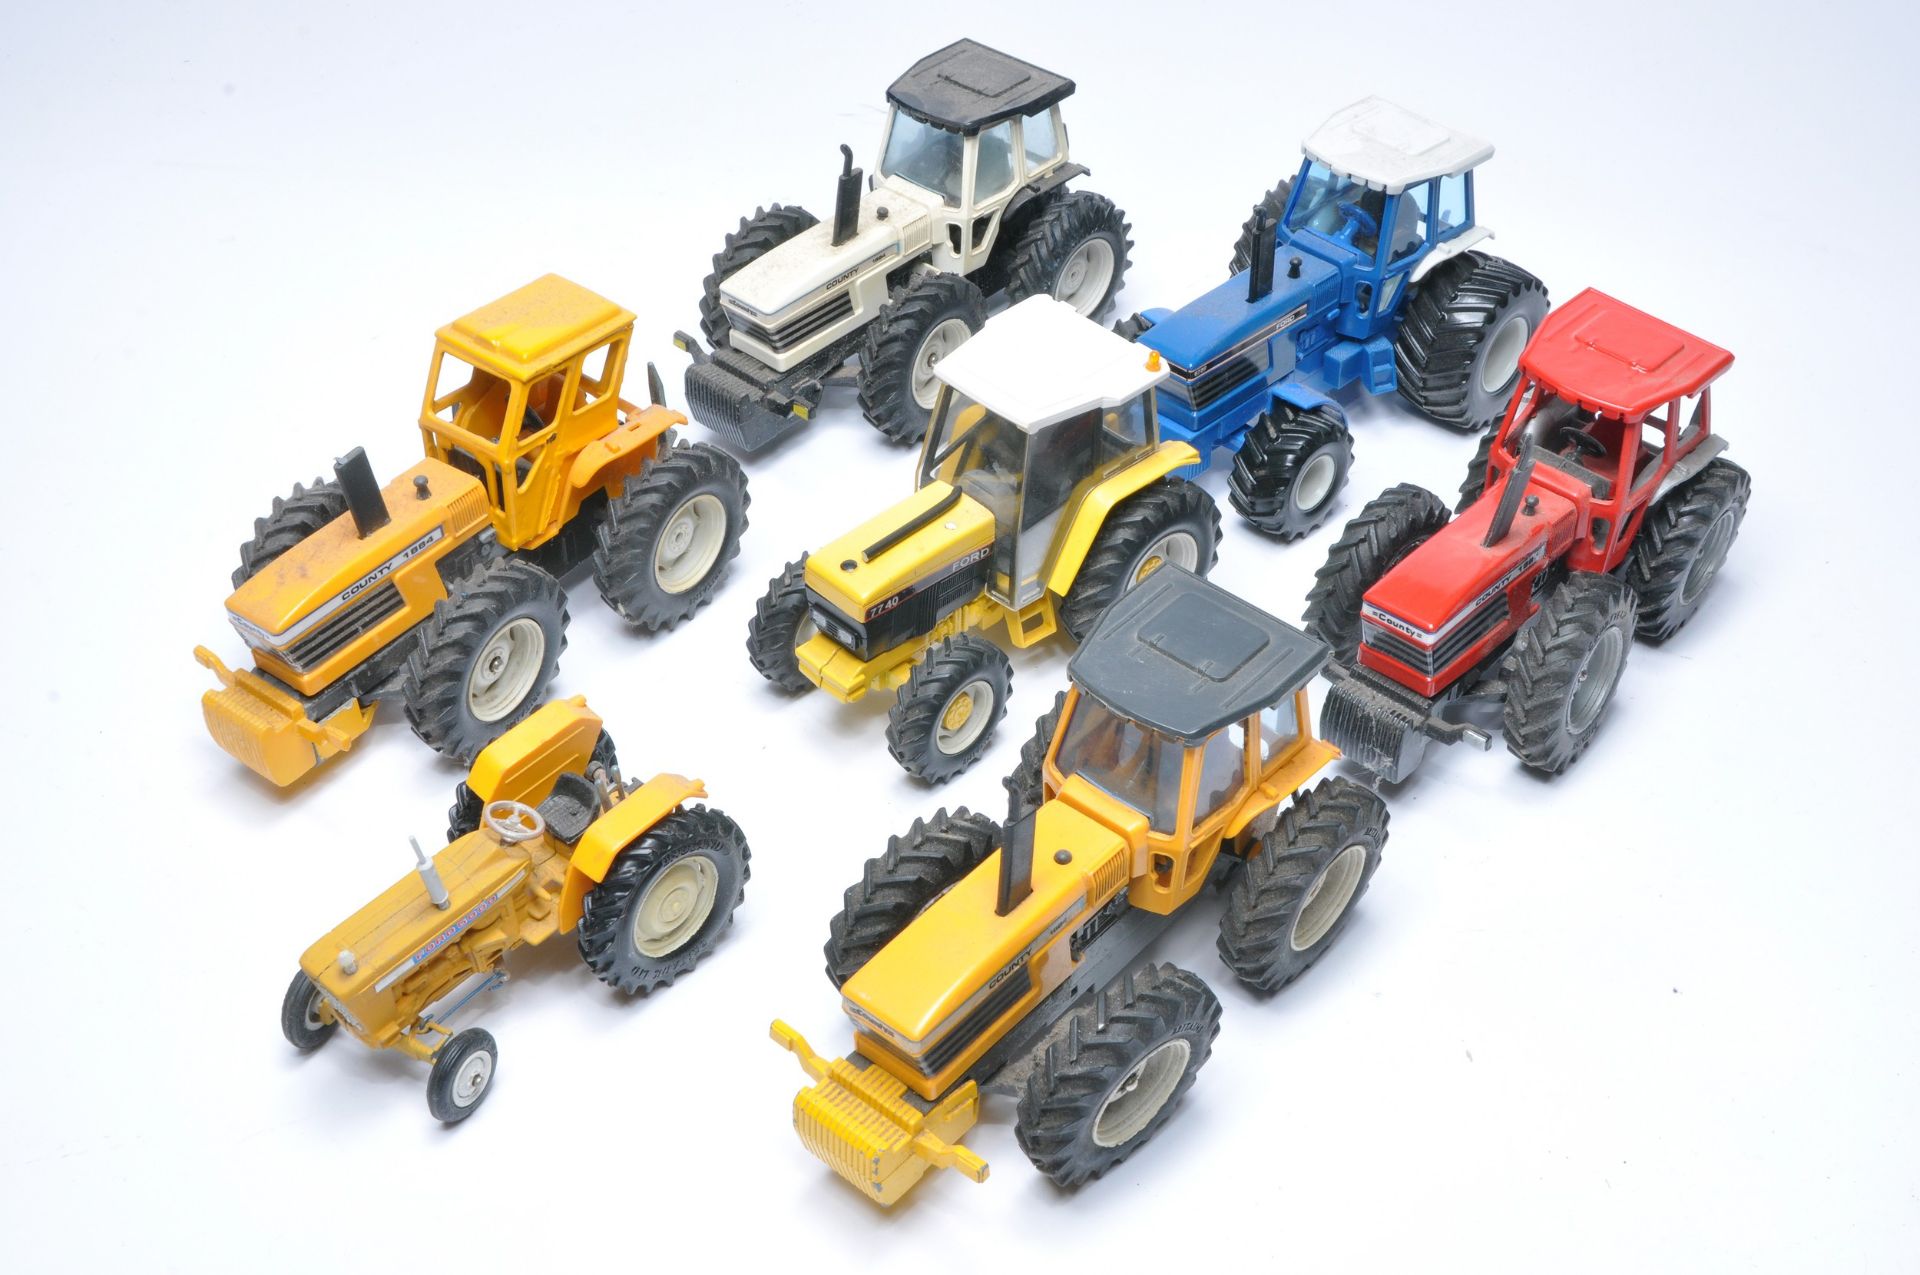 An assortment of mostly County themed tractor issues from mainly Britains plus other conversions.